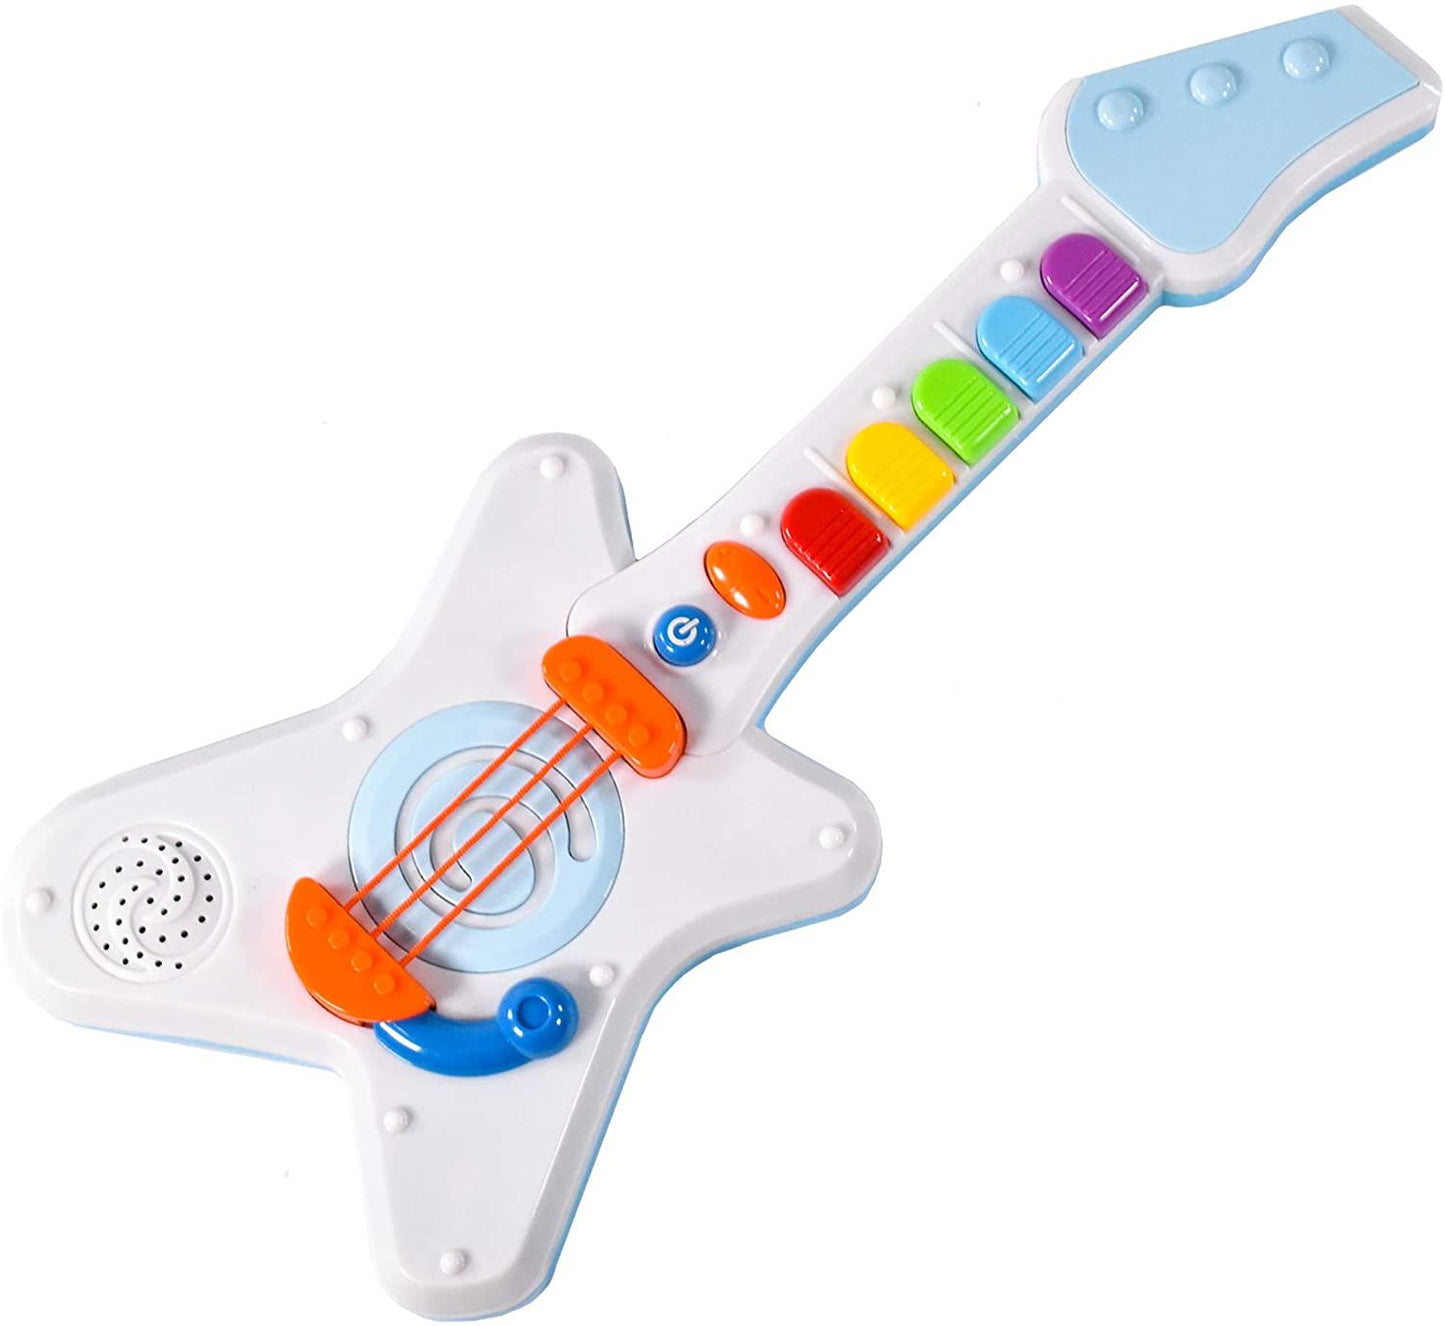 Rock N Roll Light Up & Sounds Kids Guitar by The Magic Toy Shop - UKBuyZone